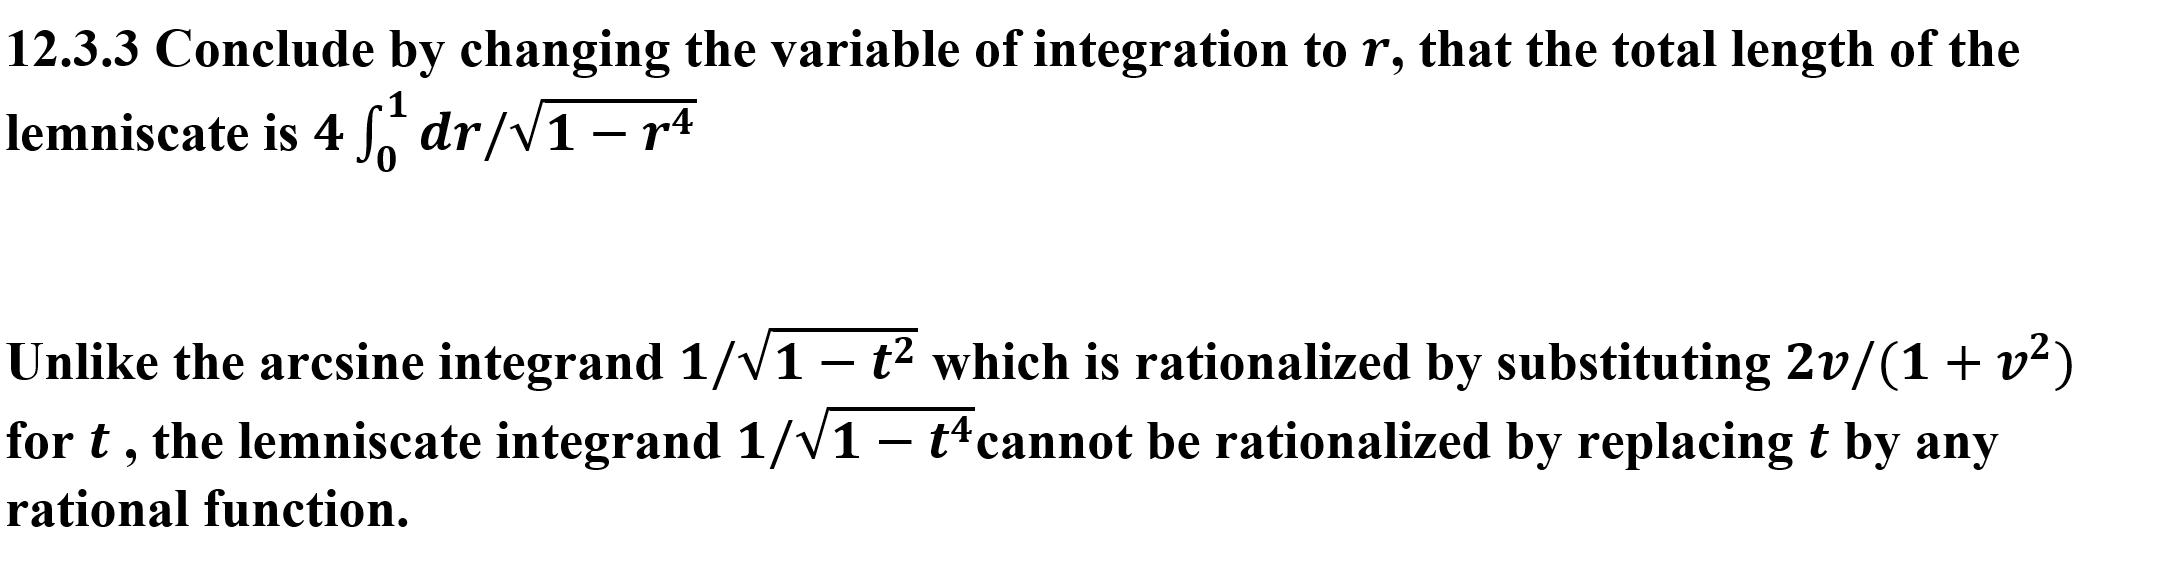 12.3.3 Conclude by changing the variable of integration to r, that the total length of the
lemniscate is 4dr/V1 - r4
Unlike the arcsine integrand 1/V1 - t2 which is rationalized by substituting 2v/(1+ v2)
for t, the lemniscate integrand 1/V1 - t4cannot be rationalized by replacing t by any
rational function.
